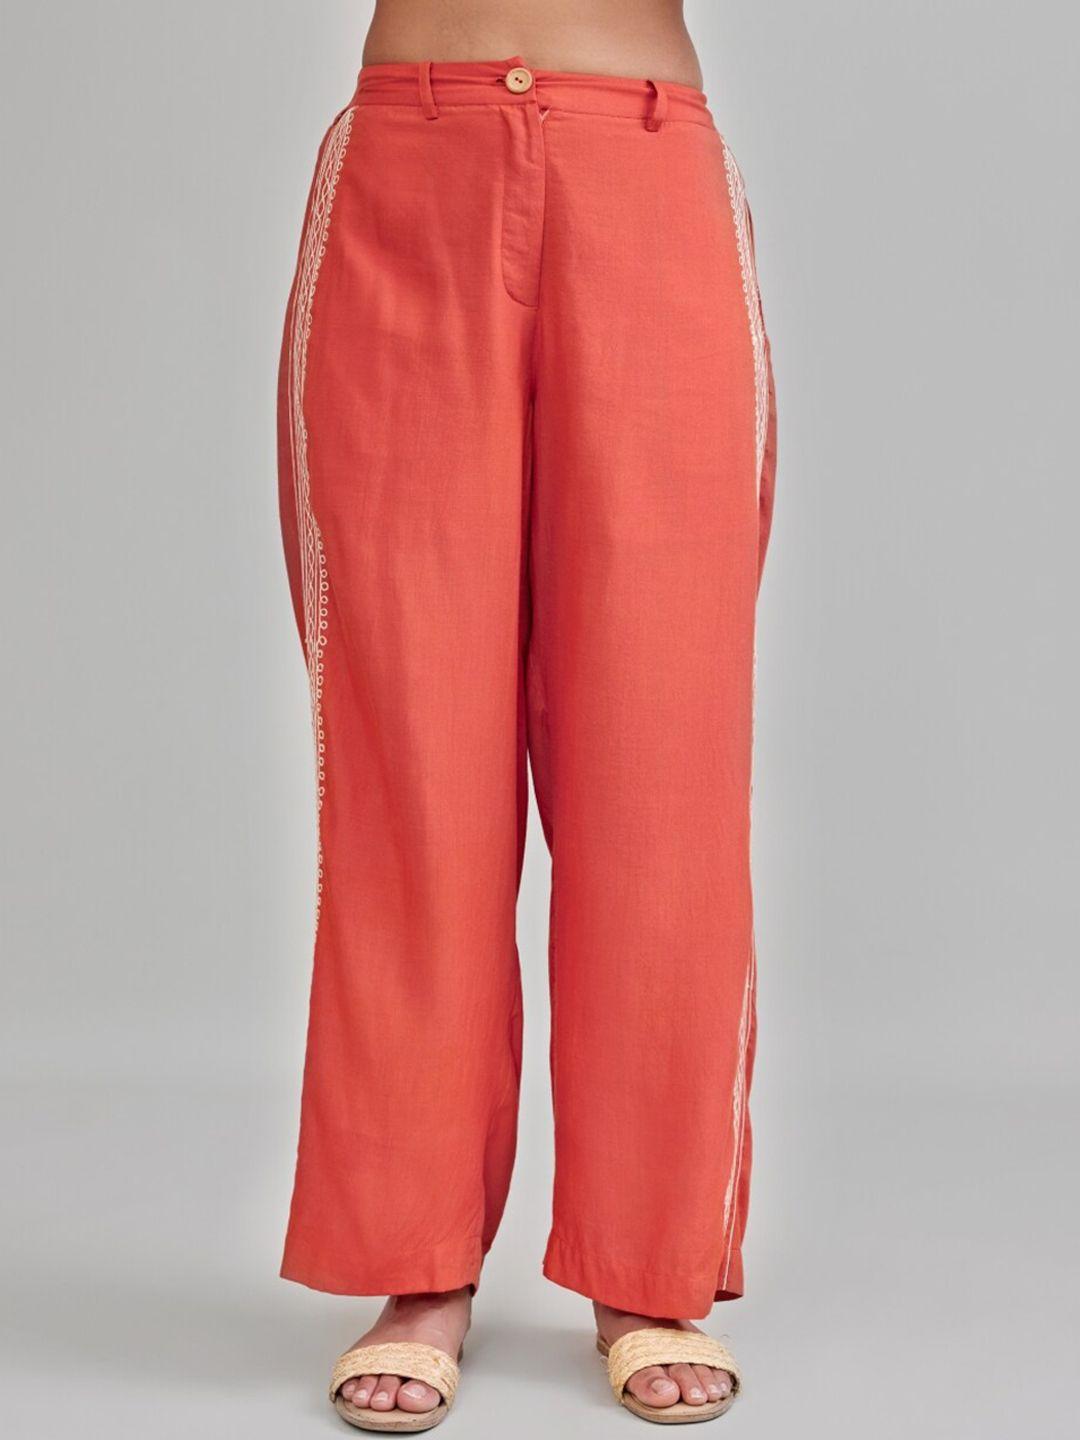 style-island-high-rise-parallel-trouser